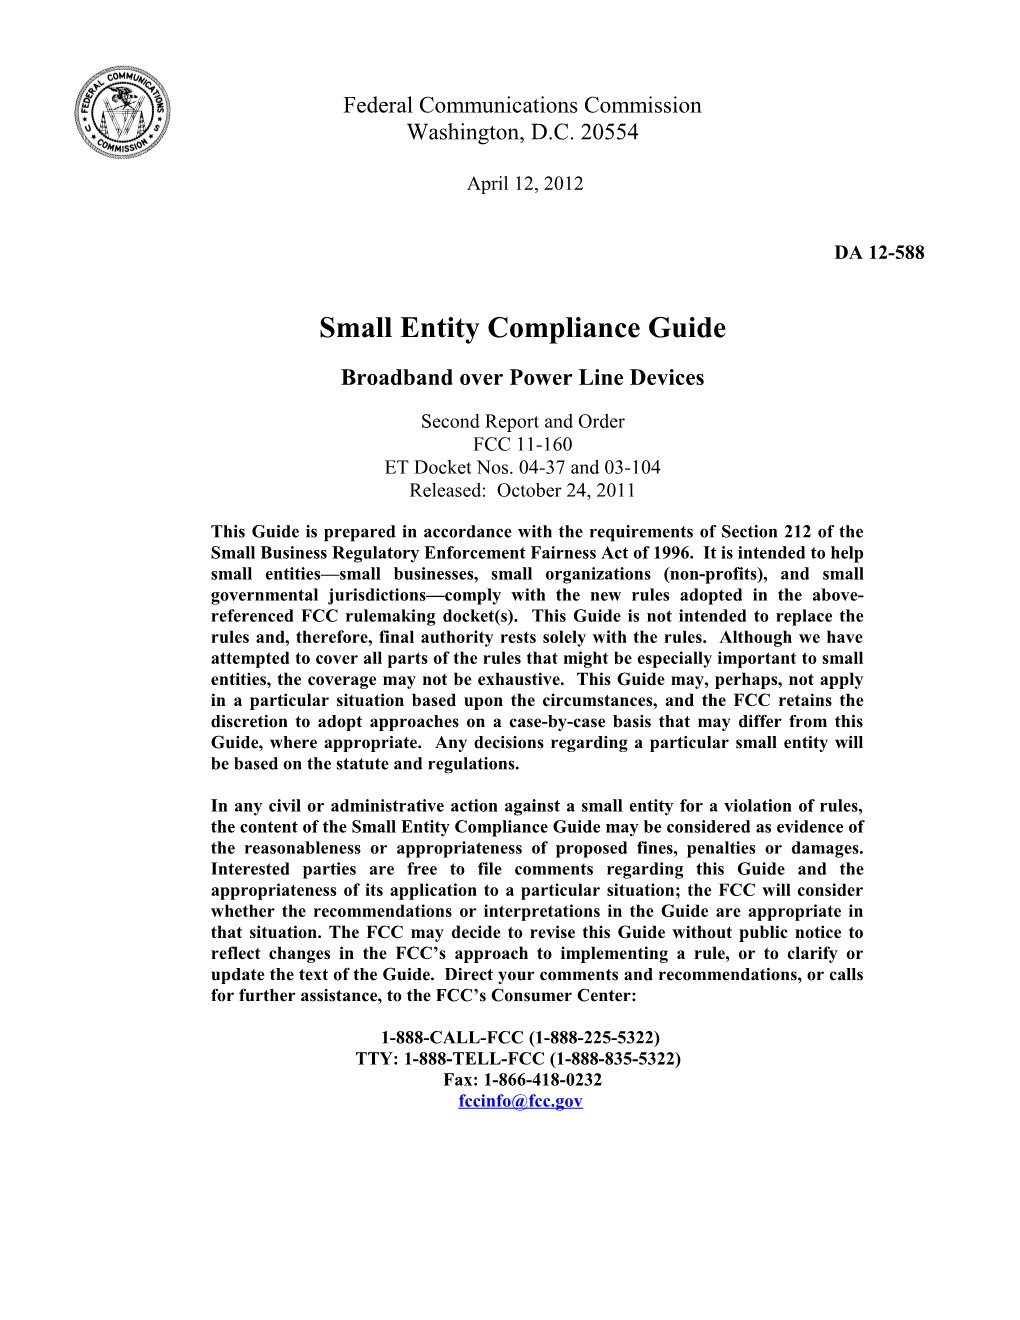 Small Entity Compliance Guide s1